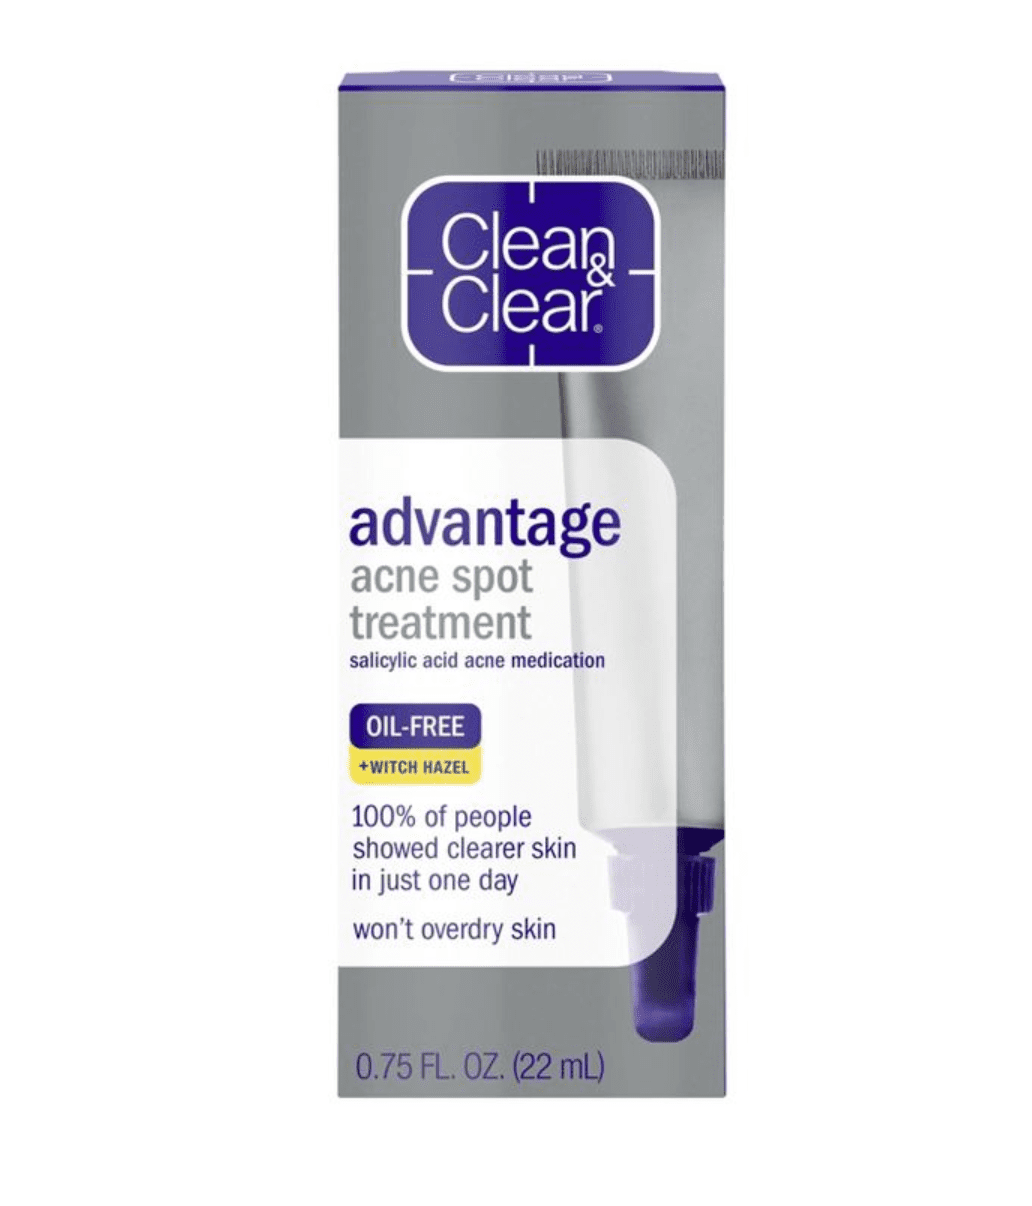 Acne products under 20, chica beauty